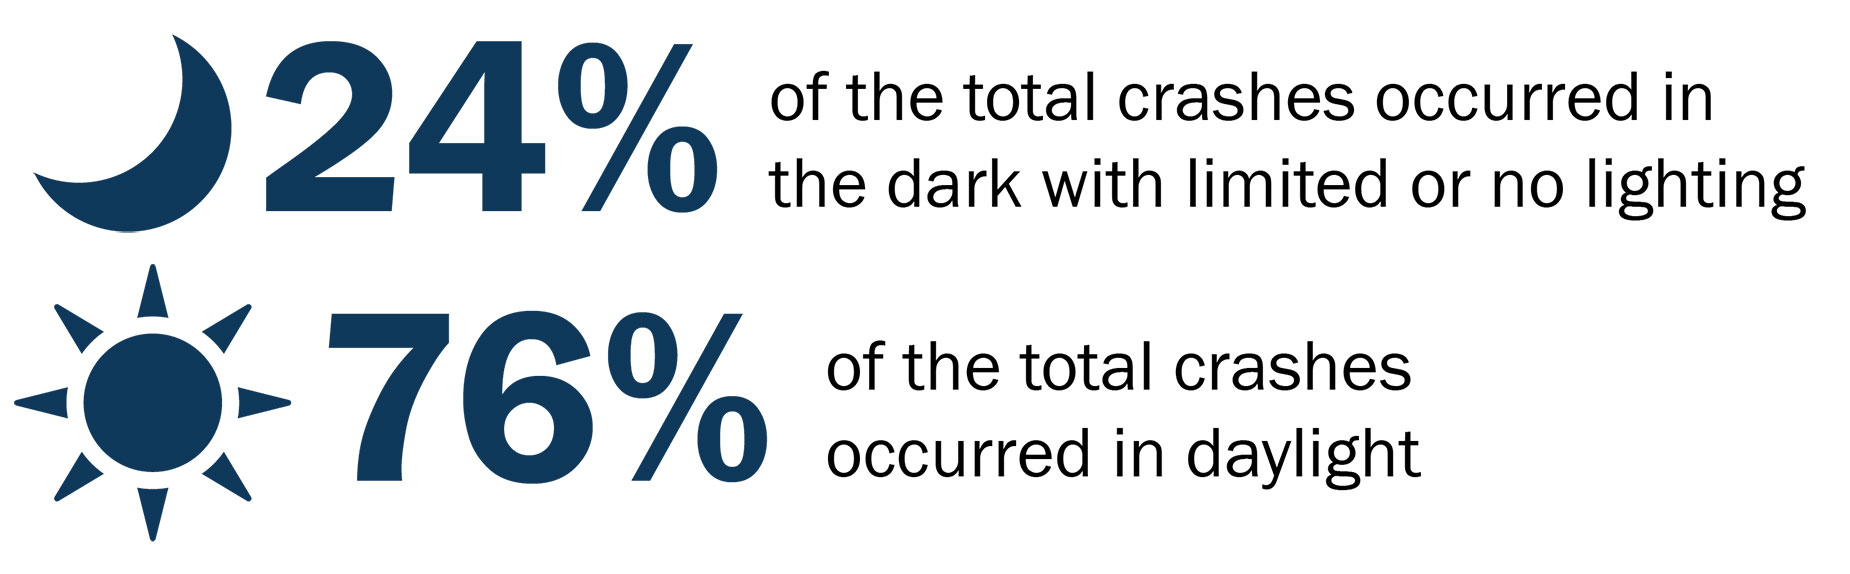 76% of crashes happen during the day and 24% at night